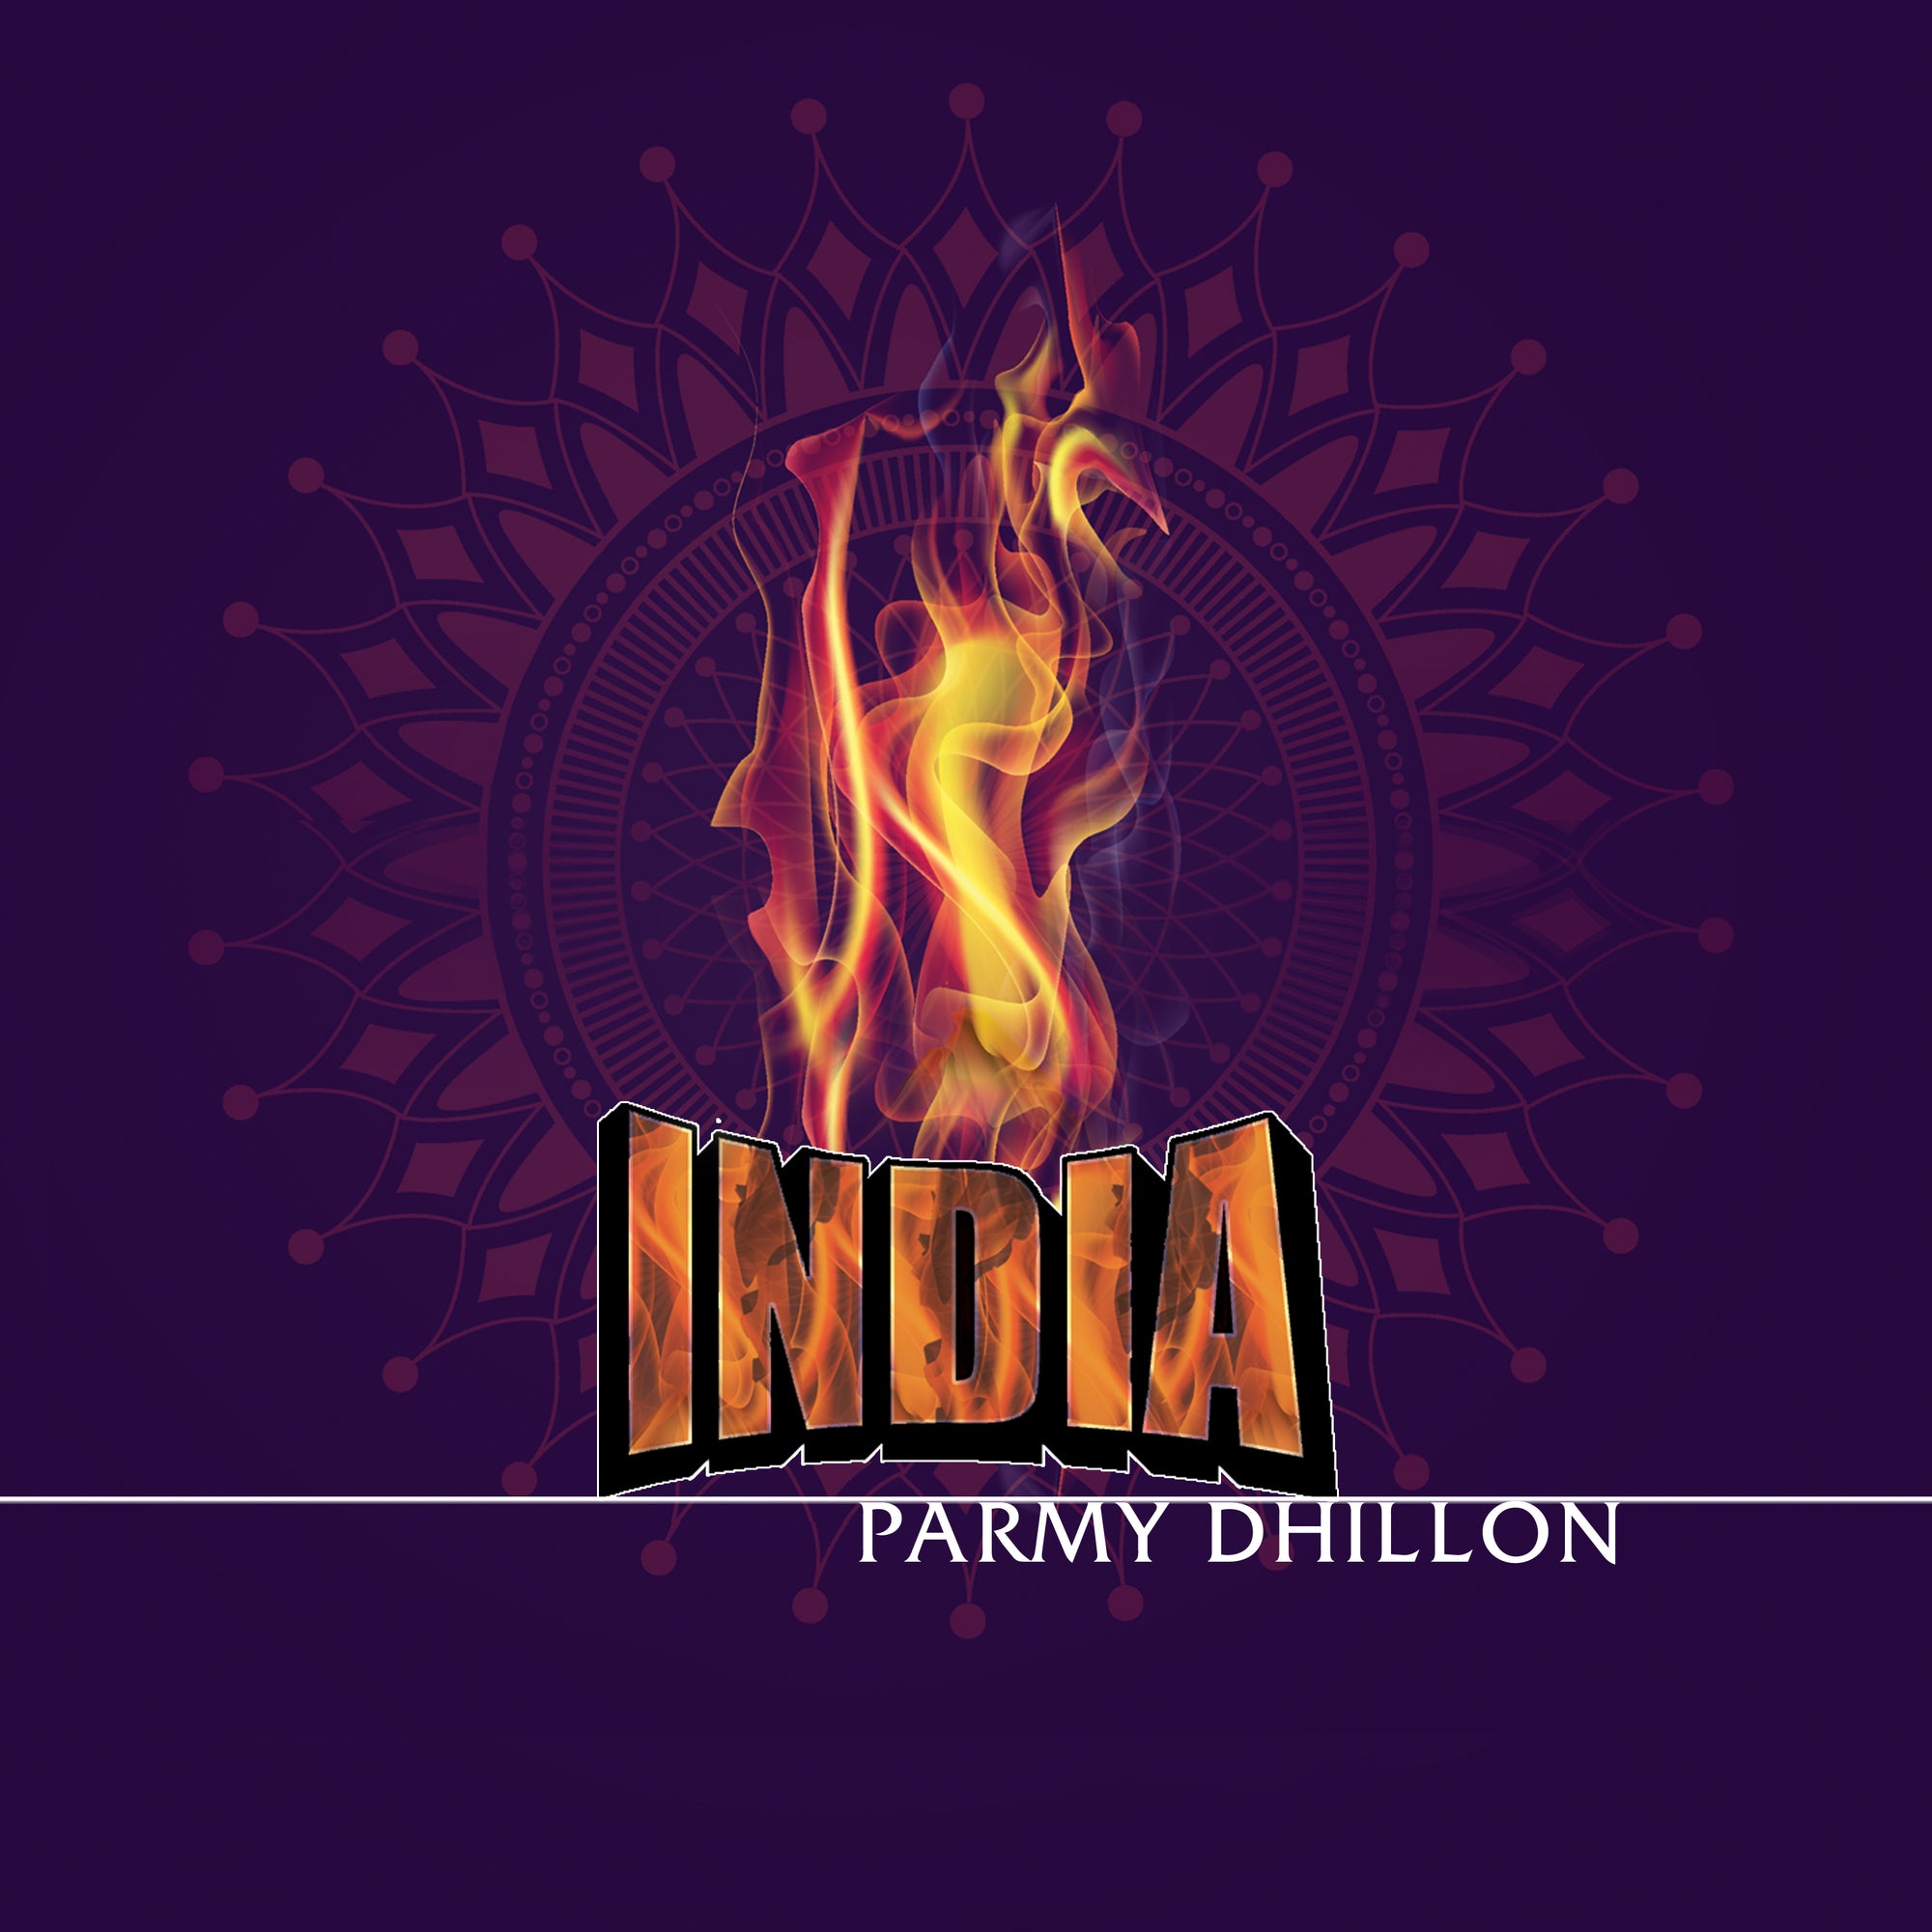 Parmy Dhillon Embarks on a Musical Journey of Self-Discovery with New Single 'India'